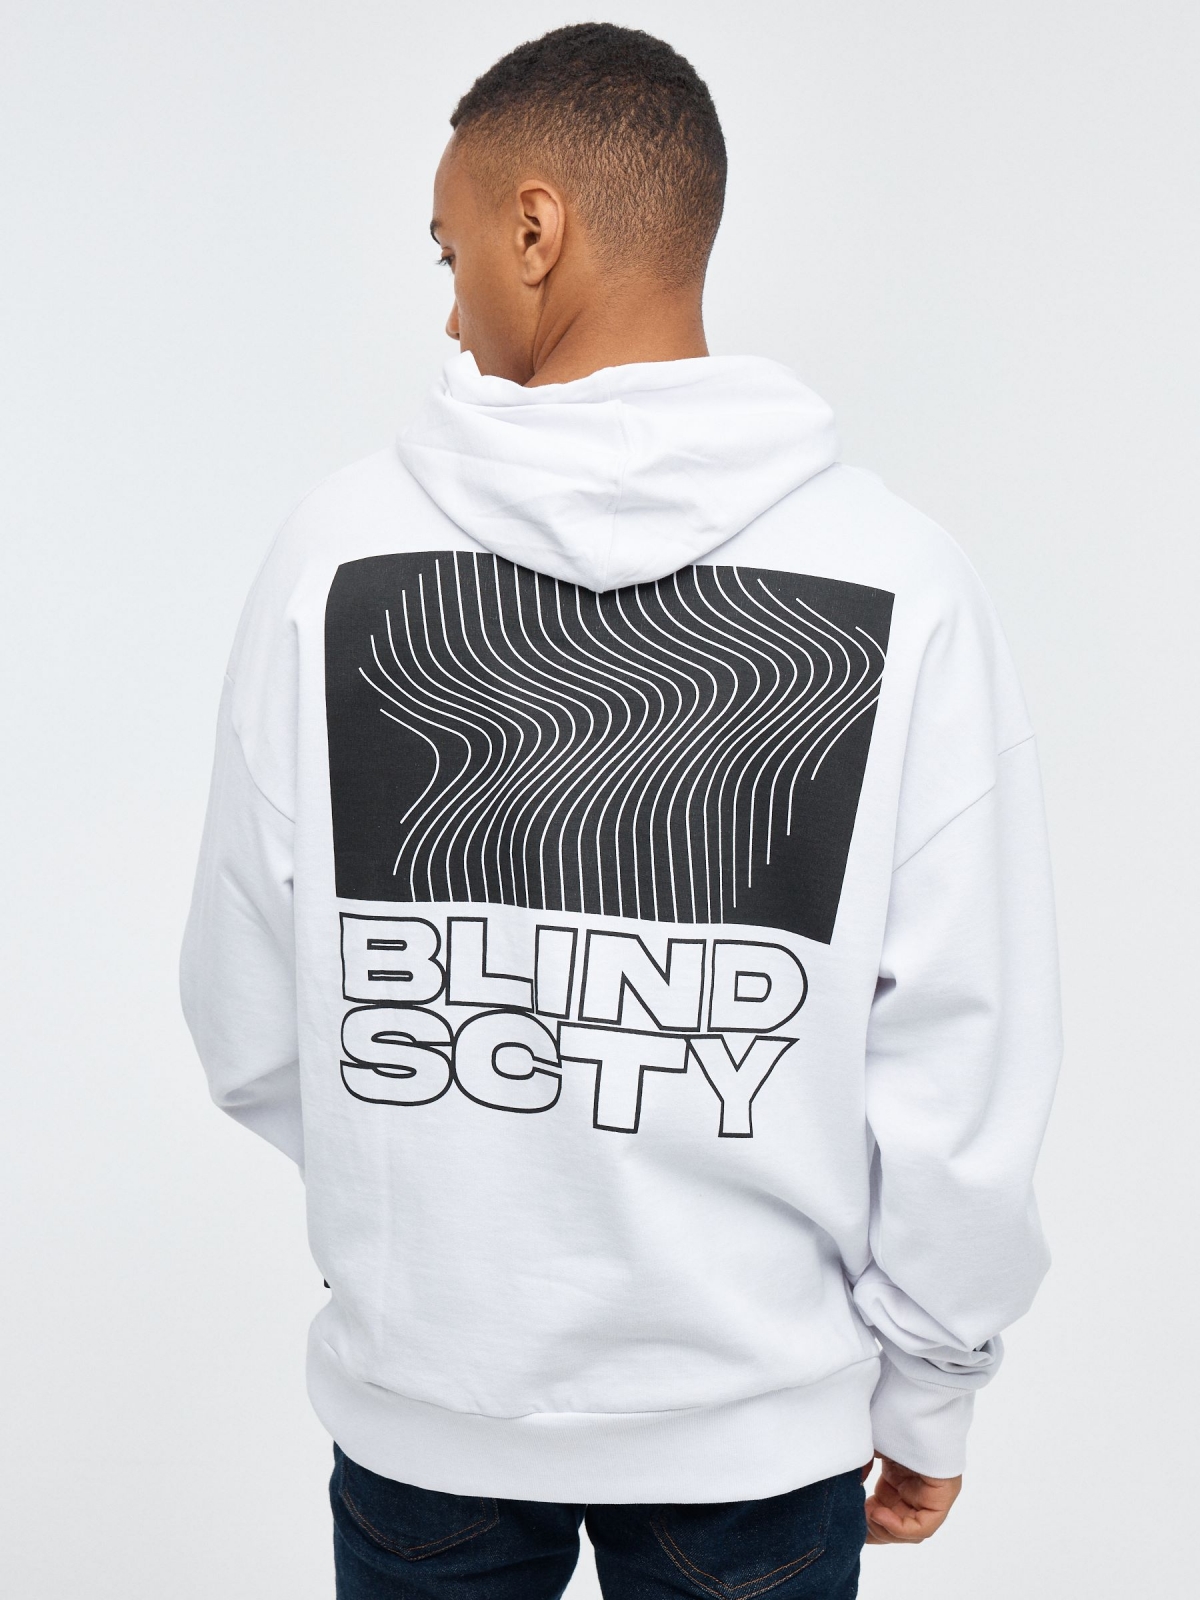 Blind SCTY Sweatshirt white middle back view